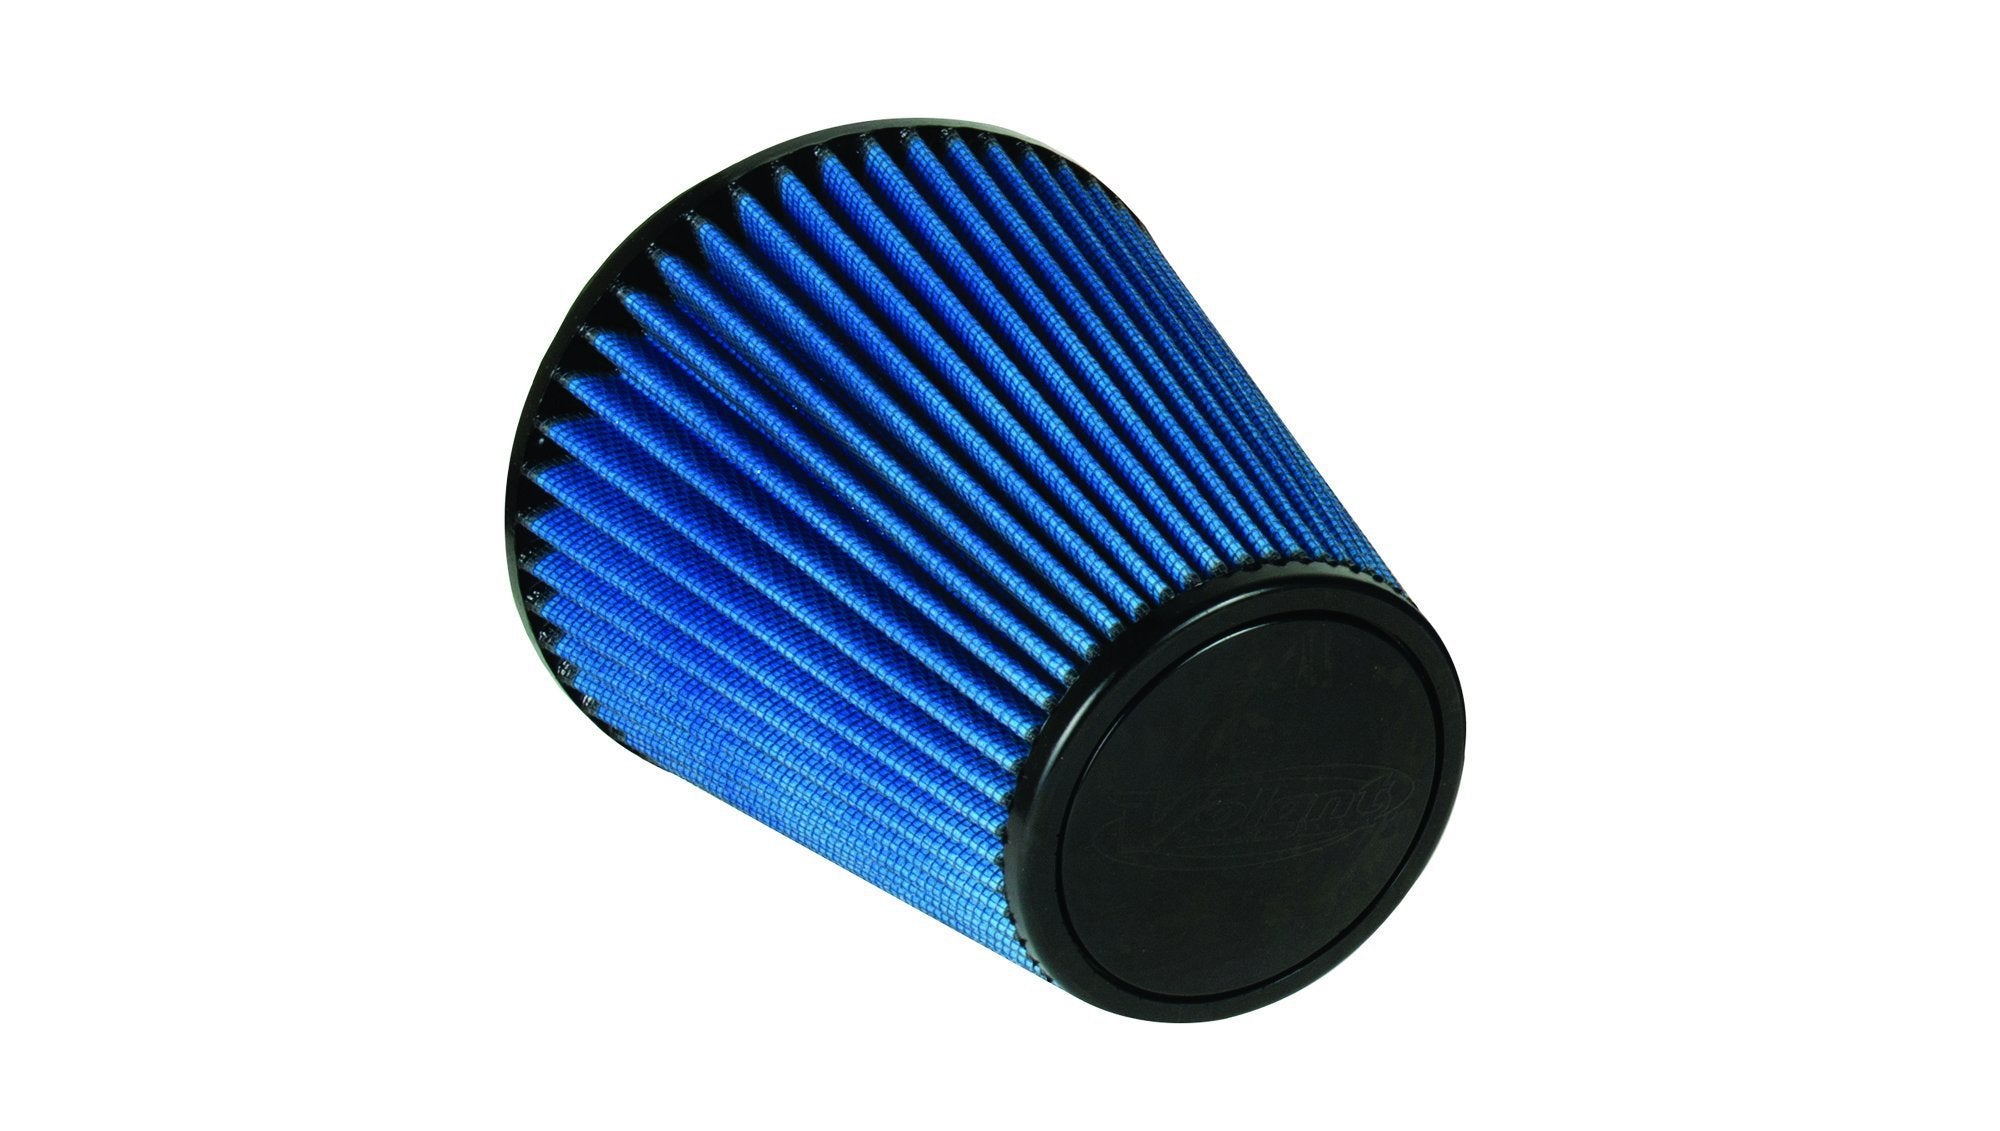 Replacement / MaxFlow Oiled Filter (5119)